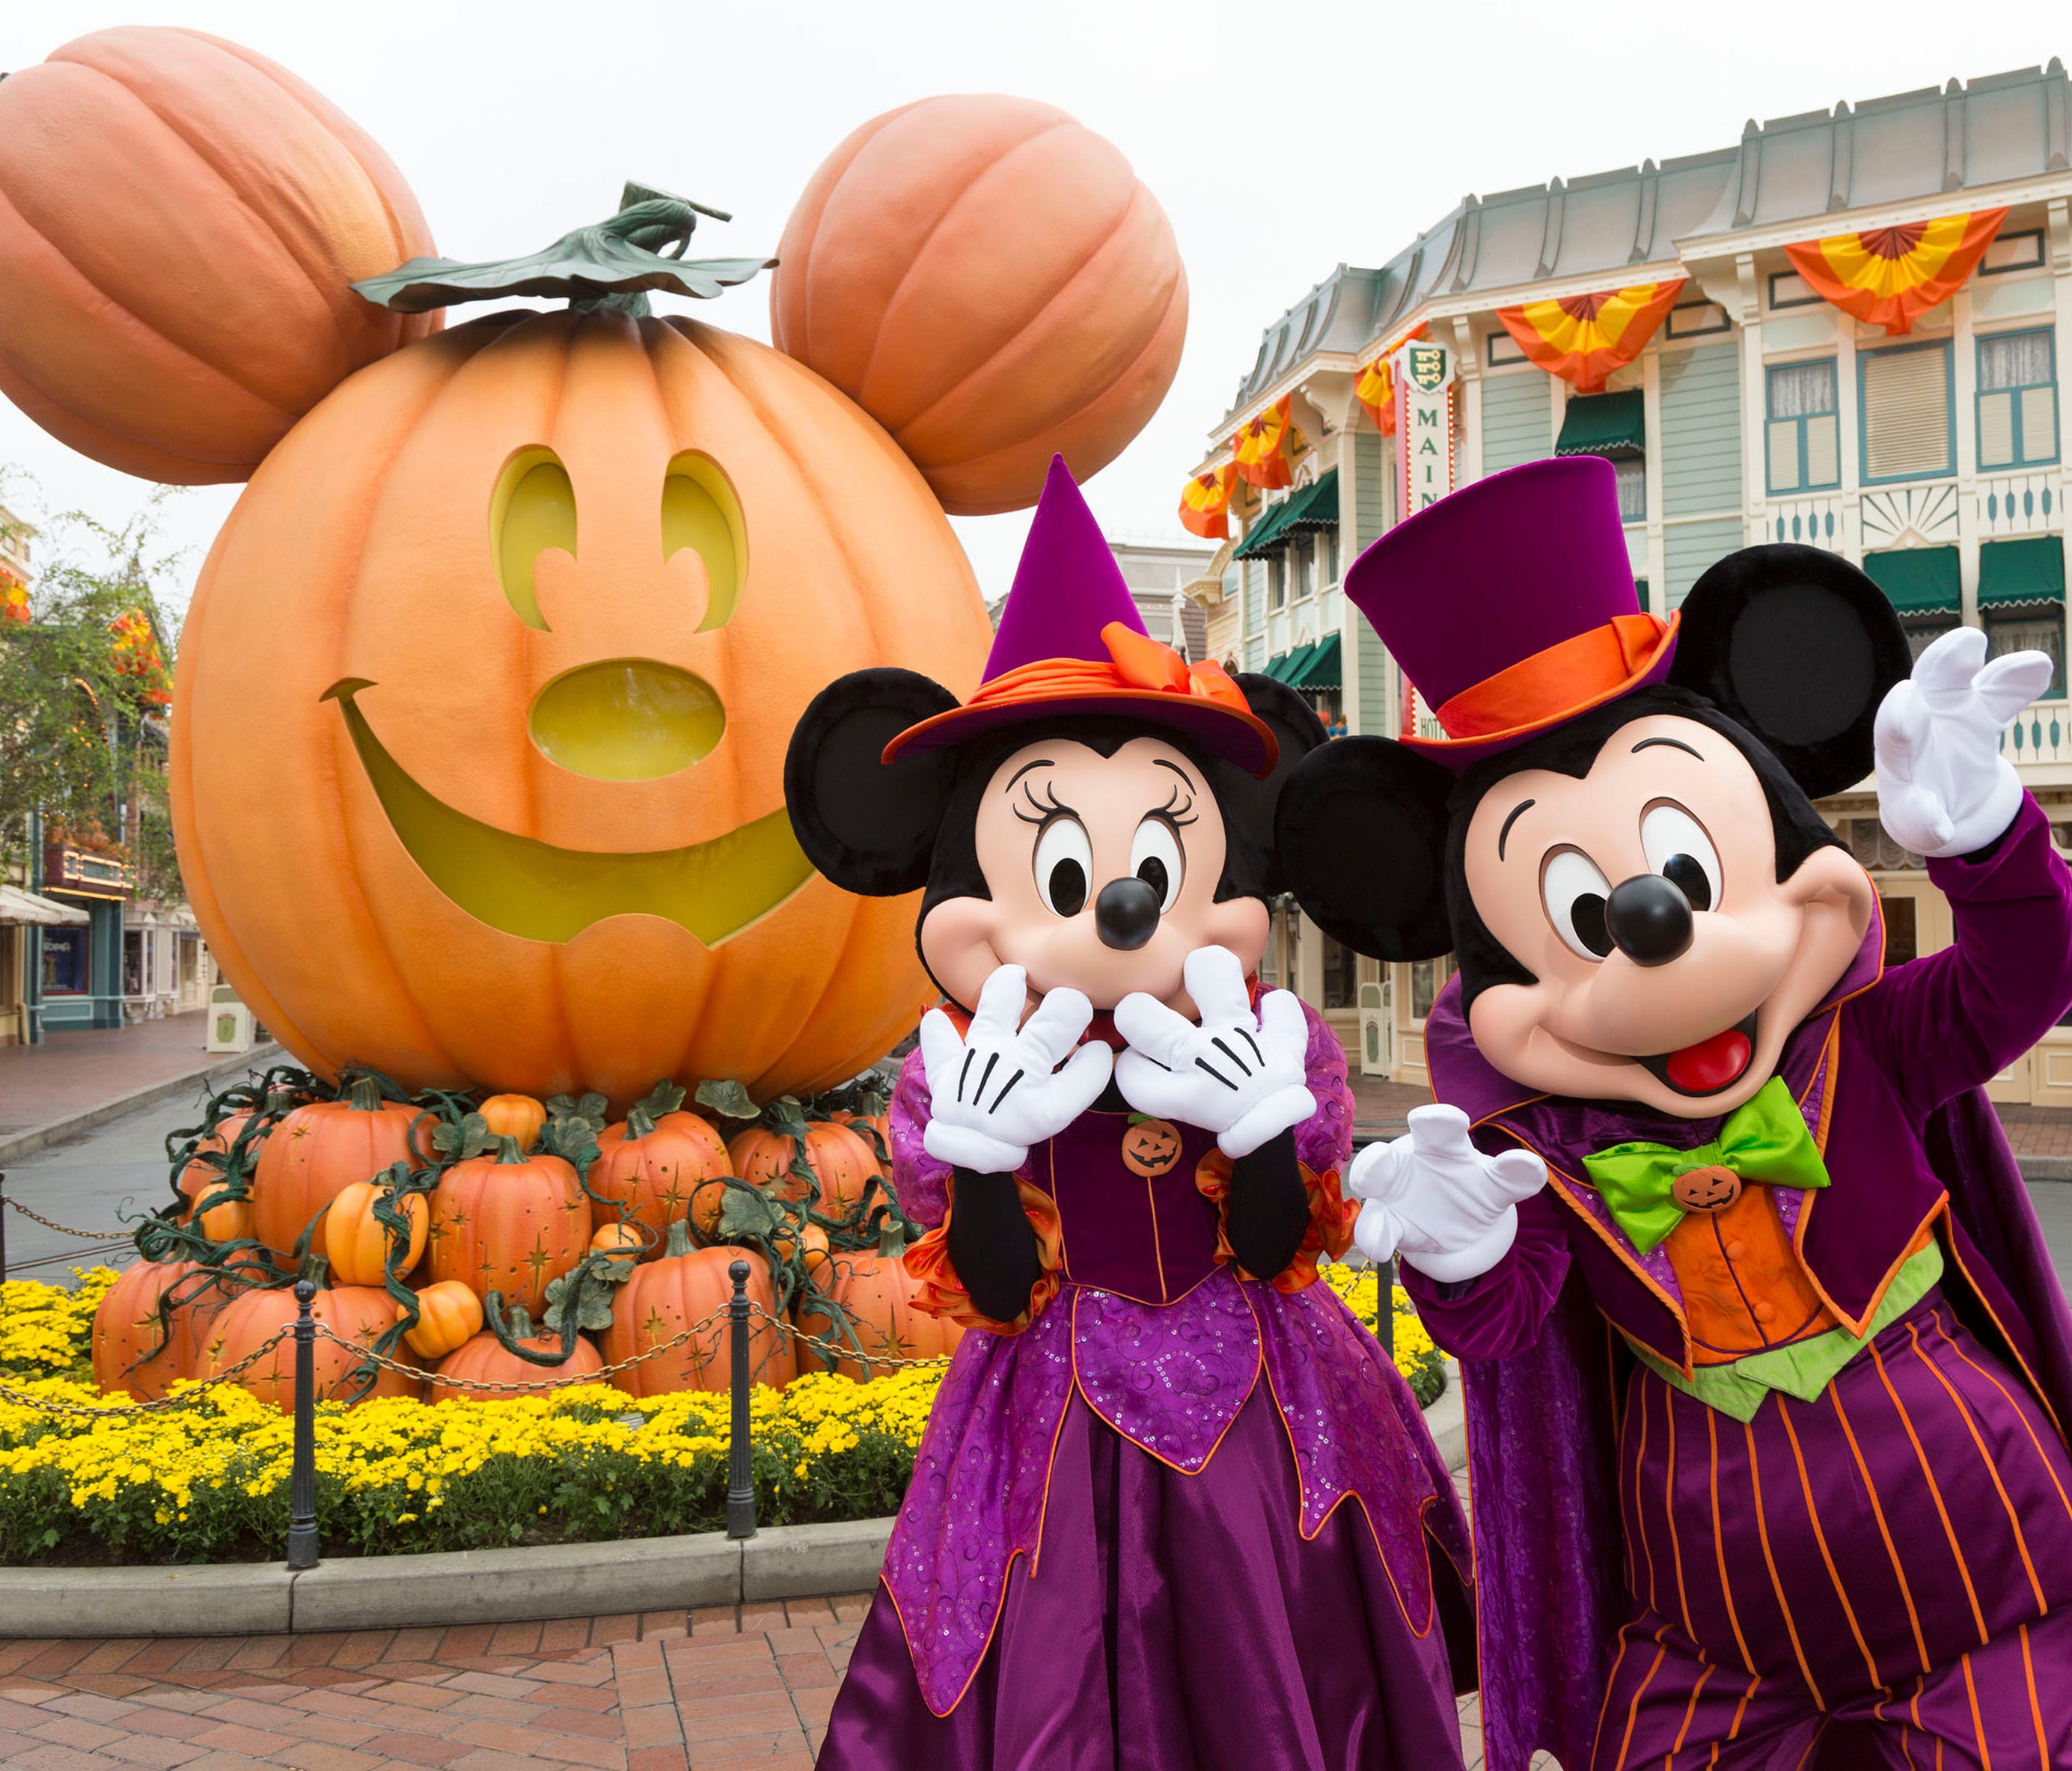 MICKEY MOUSE AND MINNIE MOUSE CELEBRATE HALLOWEEN TIME (ANAHEIM, Calif.) –– During Halloween Time at the Disneyland Resort, guests will encounter beloved characters dressed in fun seasonal costumes, including Mickey Mouse and Minnie Mouse. The Hallow